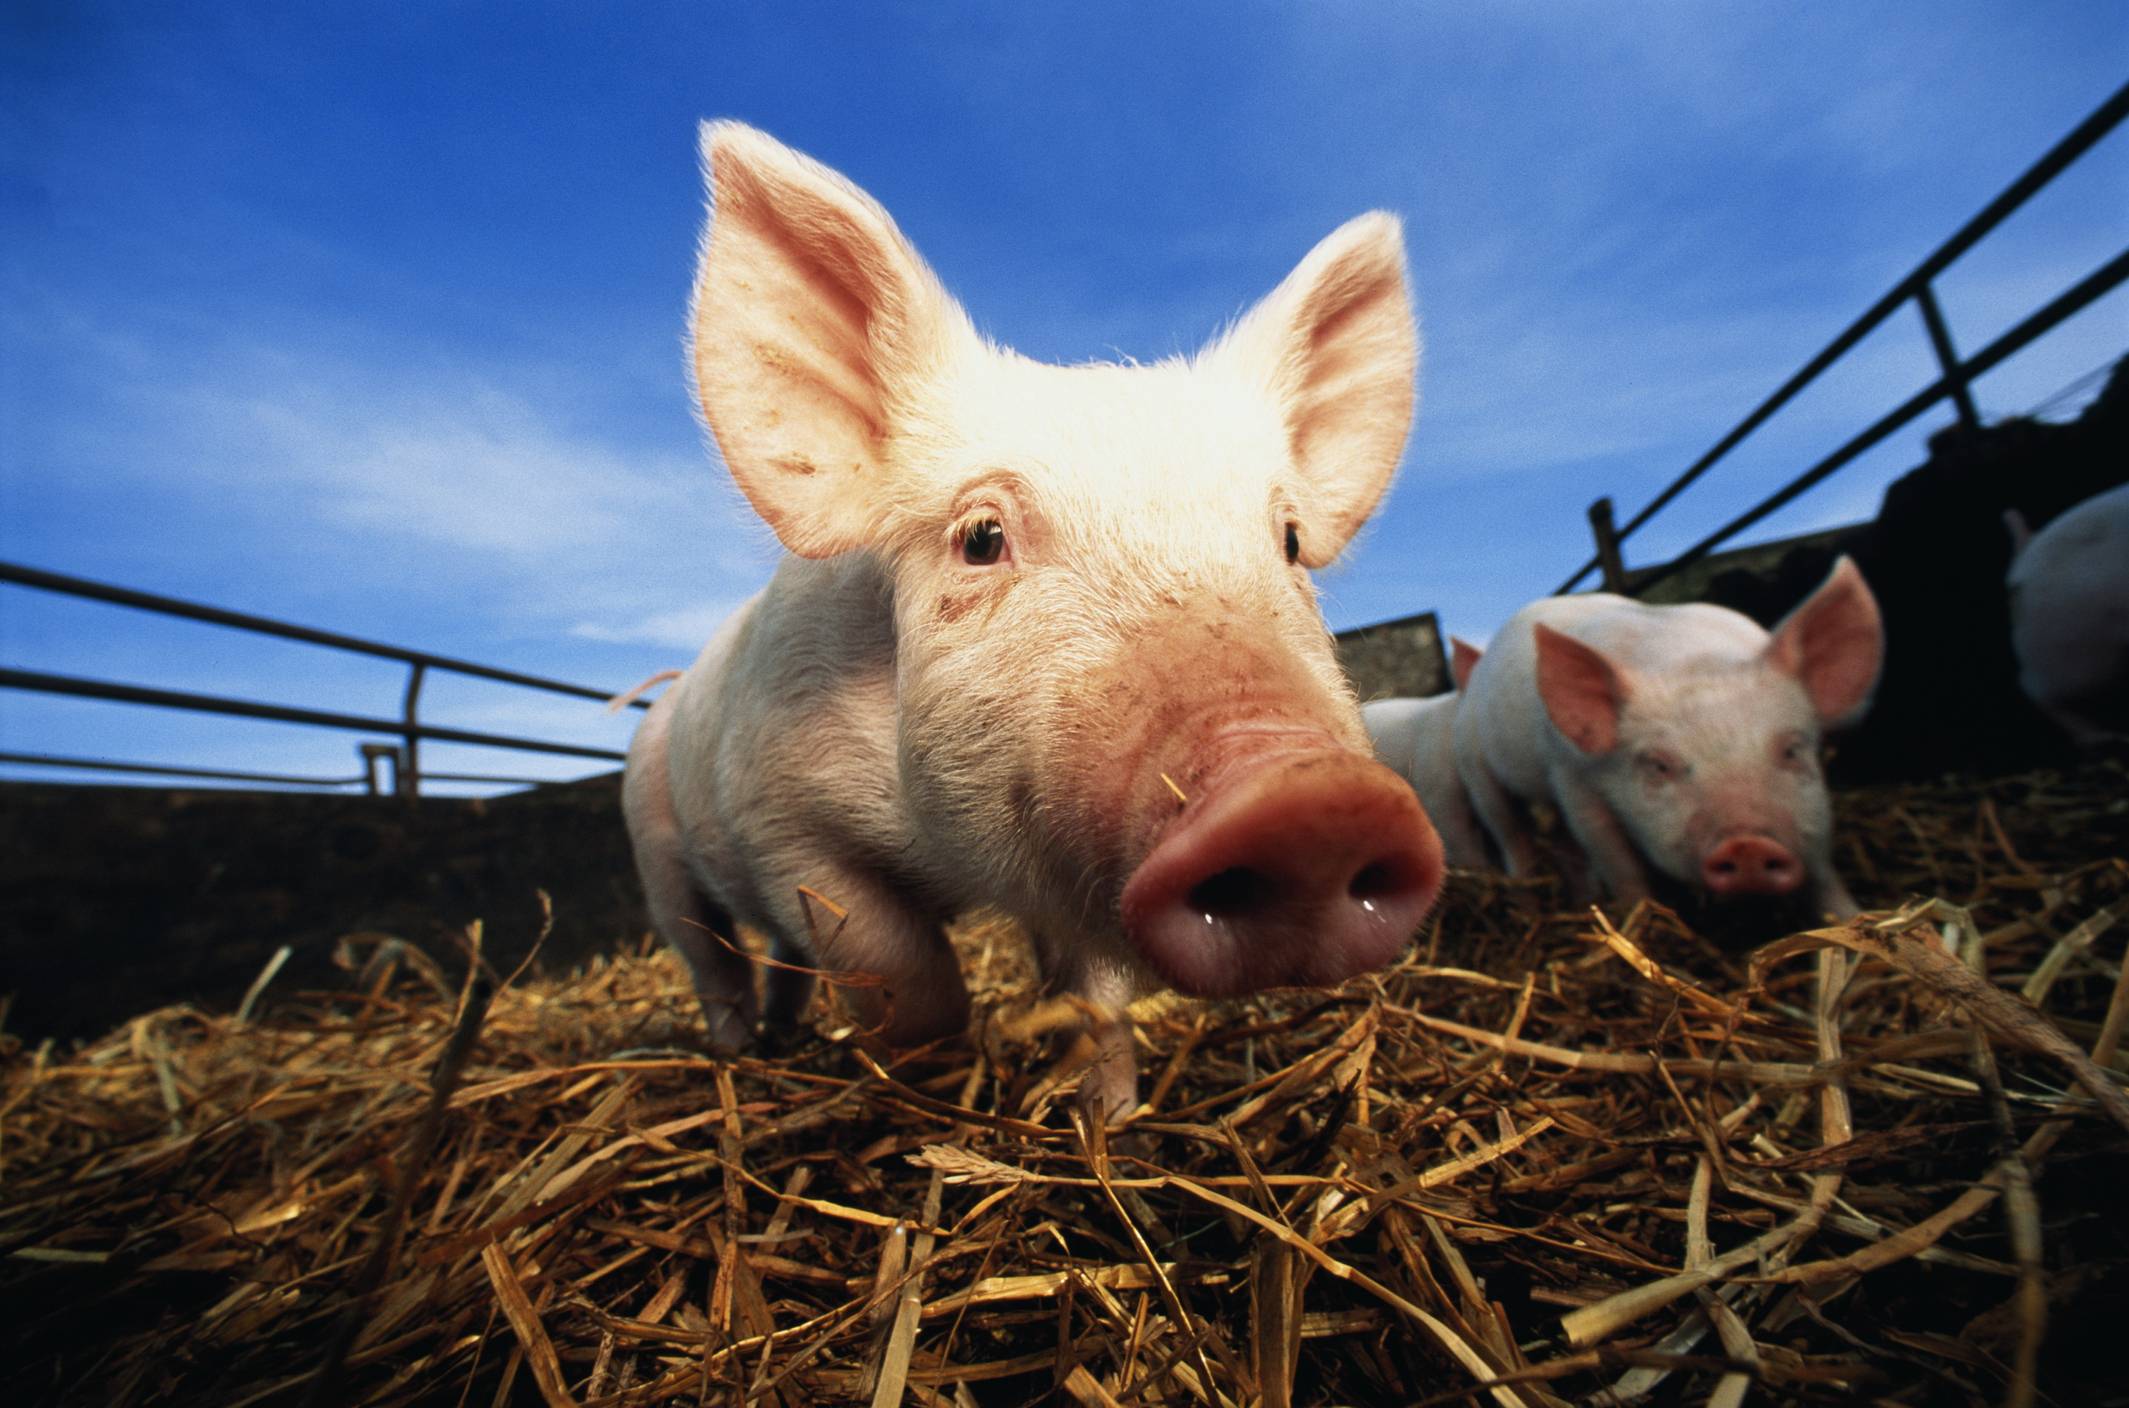 Two pigs in a pen, one close to the camera with a prominent snout